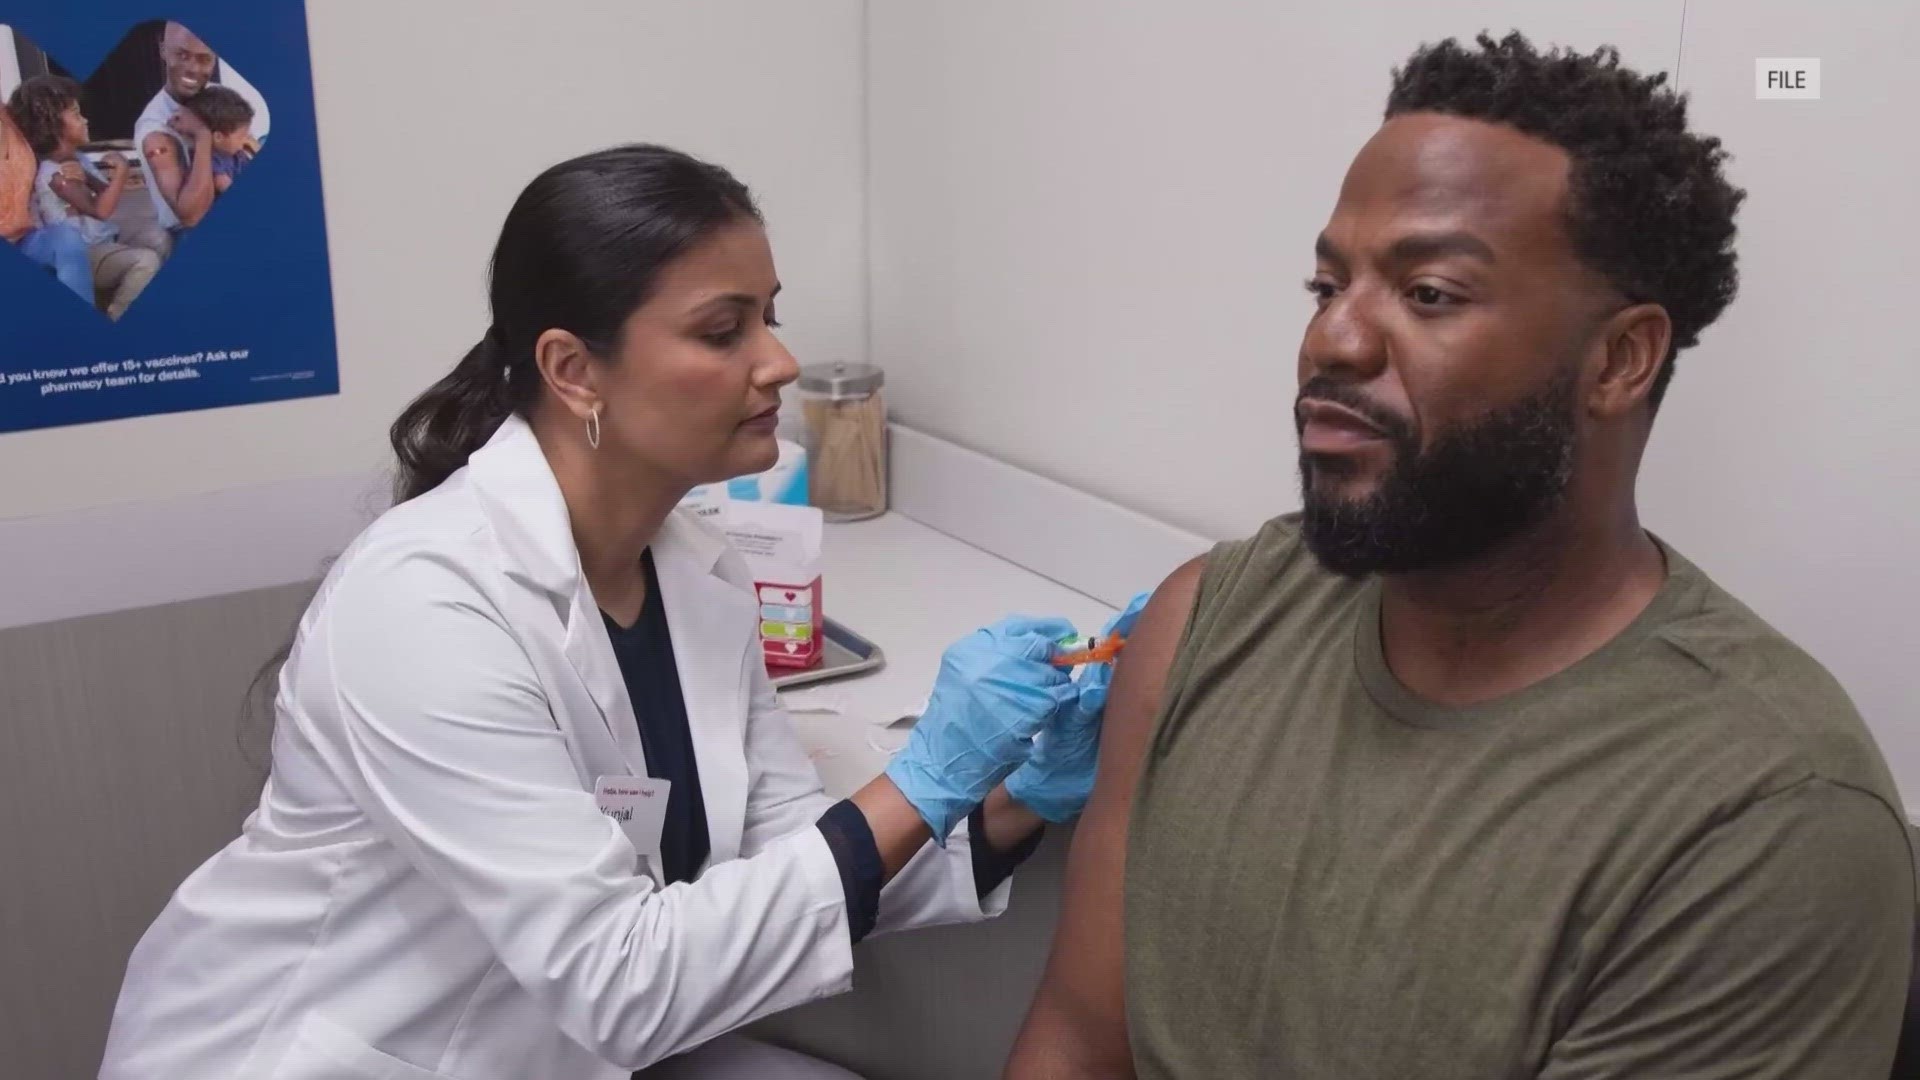 The reasons behind inequities when it comes to flu shots